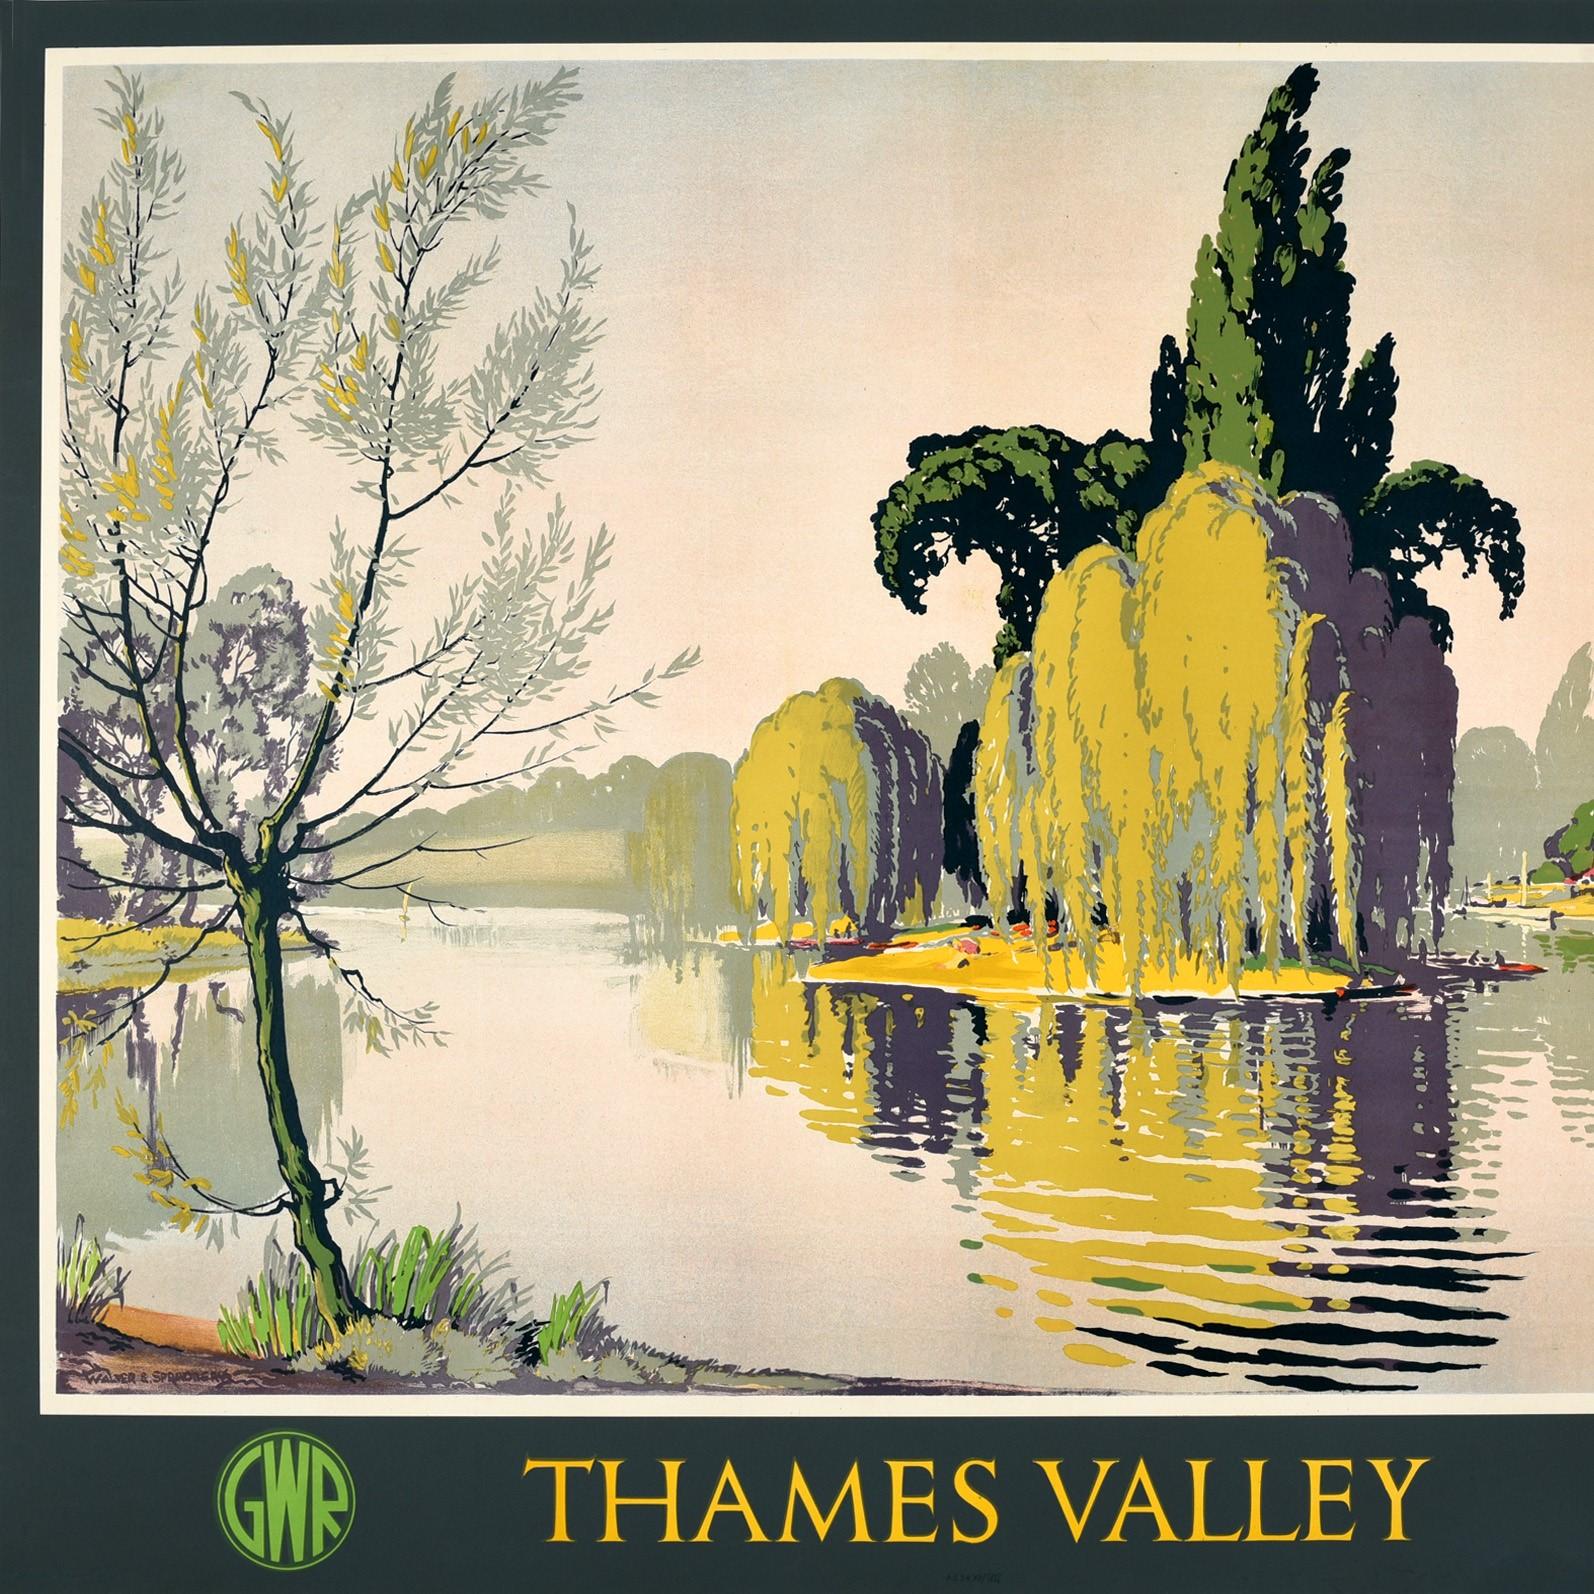 British Original Vintage Great Western And Southern Railway Poster Thames Valley GWR SR For Sale